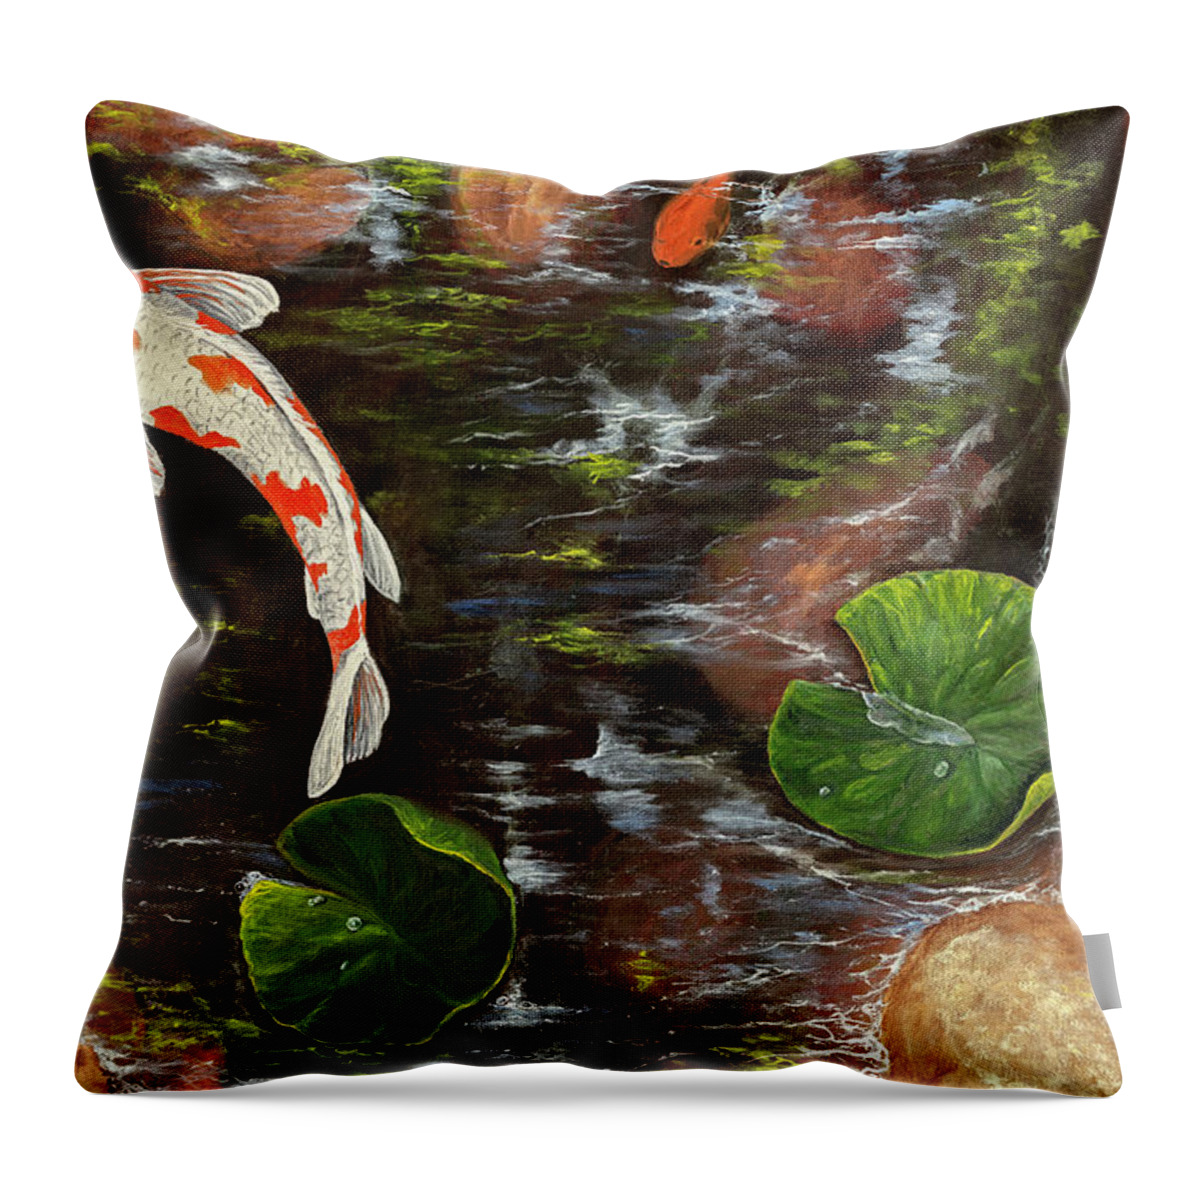 Fish Throw Pillow featuring the painting Koi Pond Right Side by Darice Machel McGuire